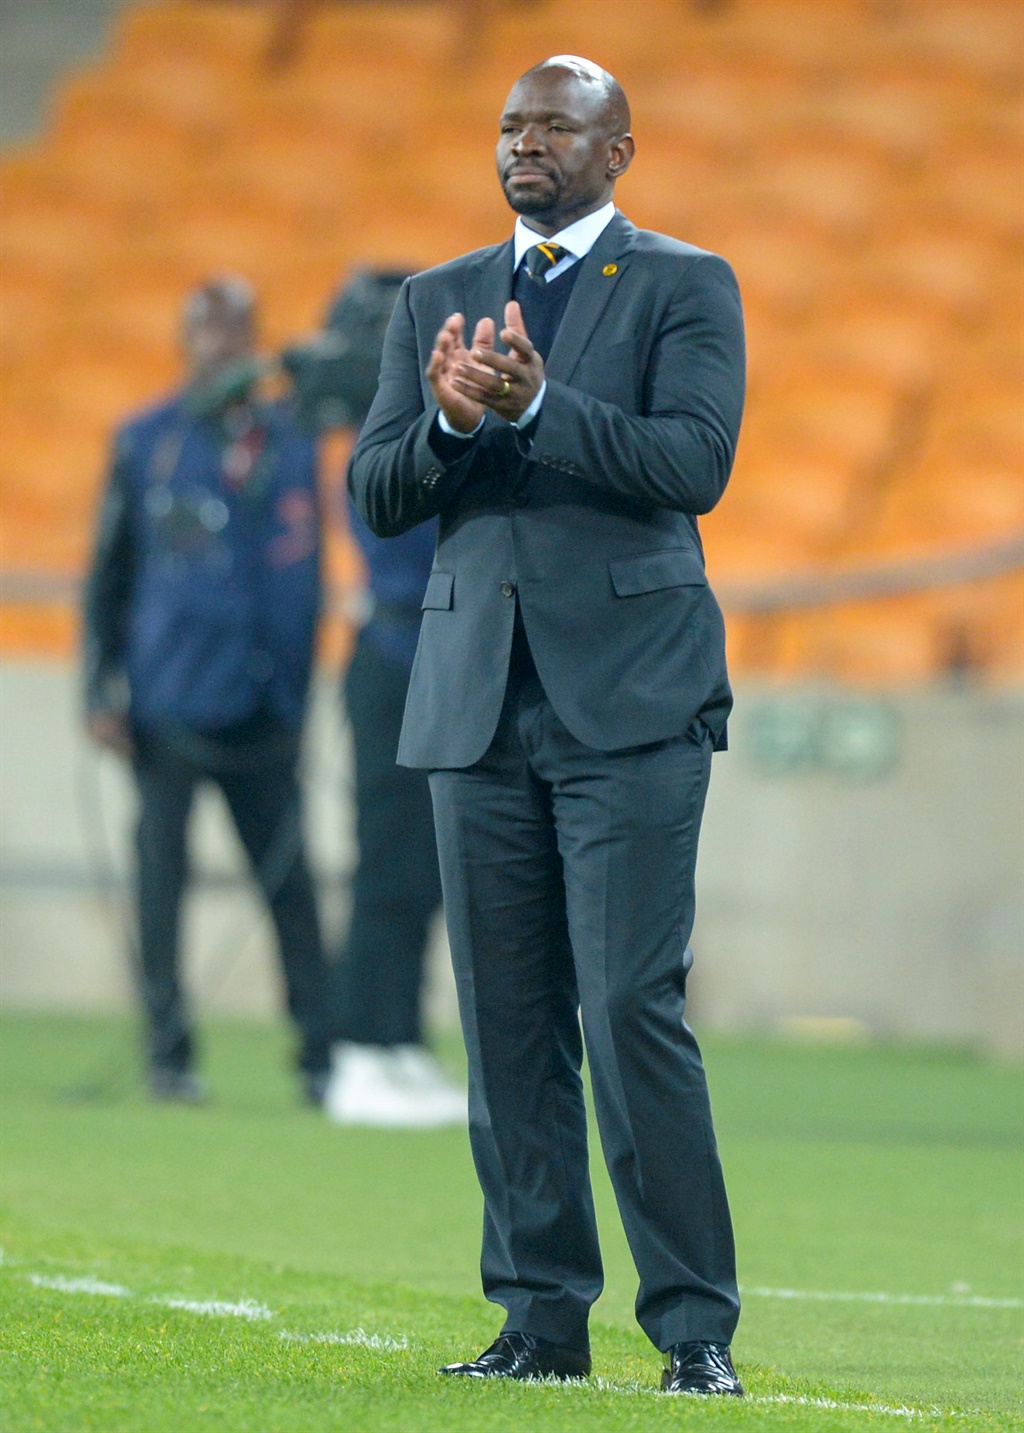 Kaizer Chiefs coach Steve Komphela has revealed he will be looking to bring in some news faces at Naturena in the Premiership off-season.